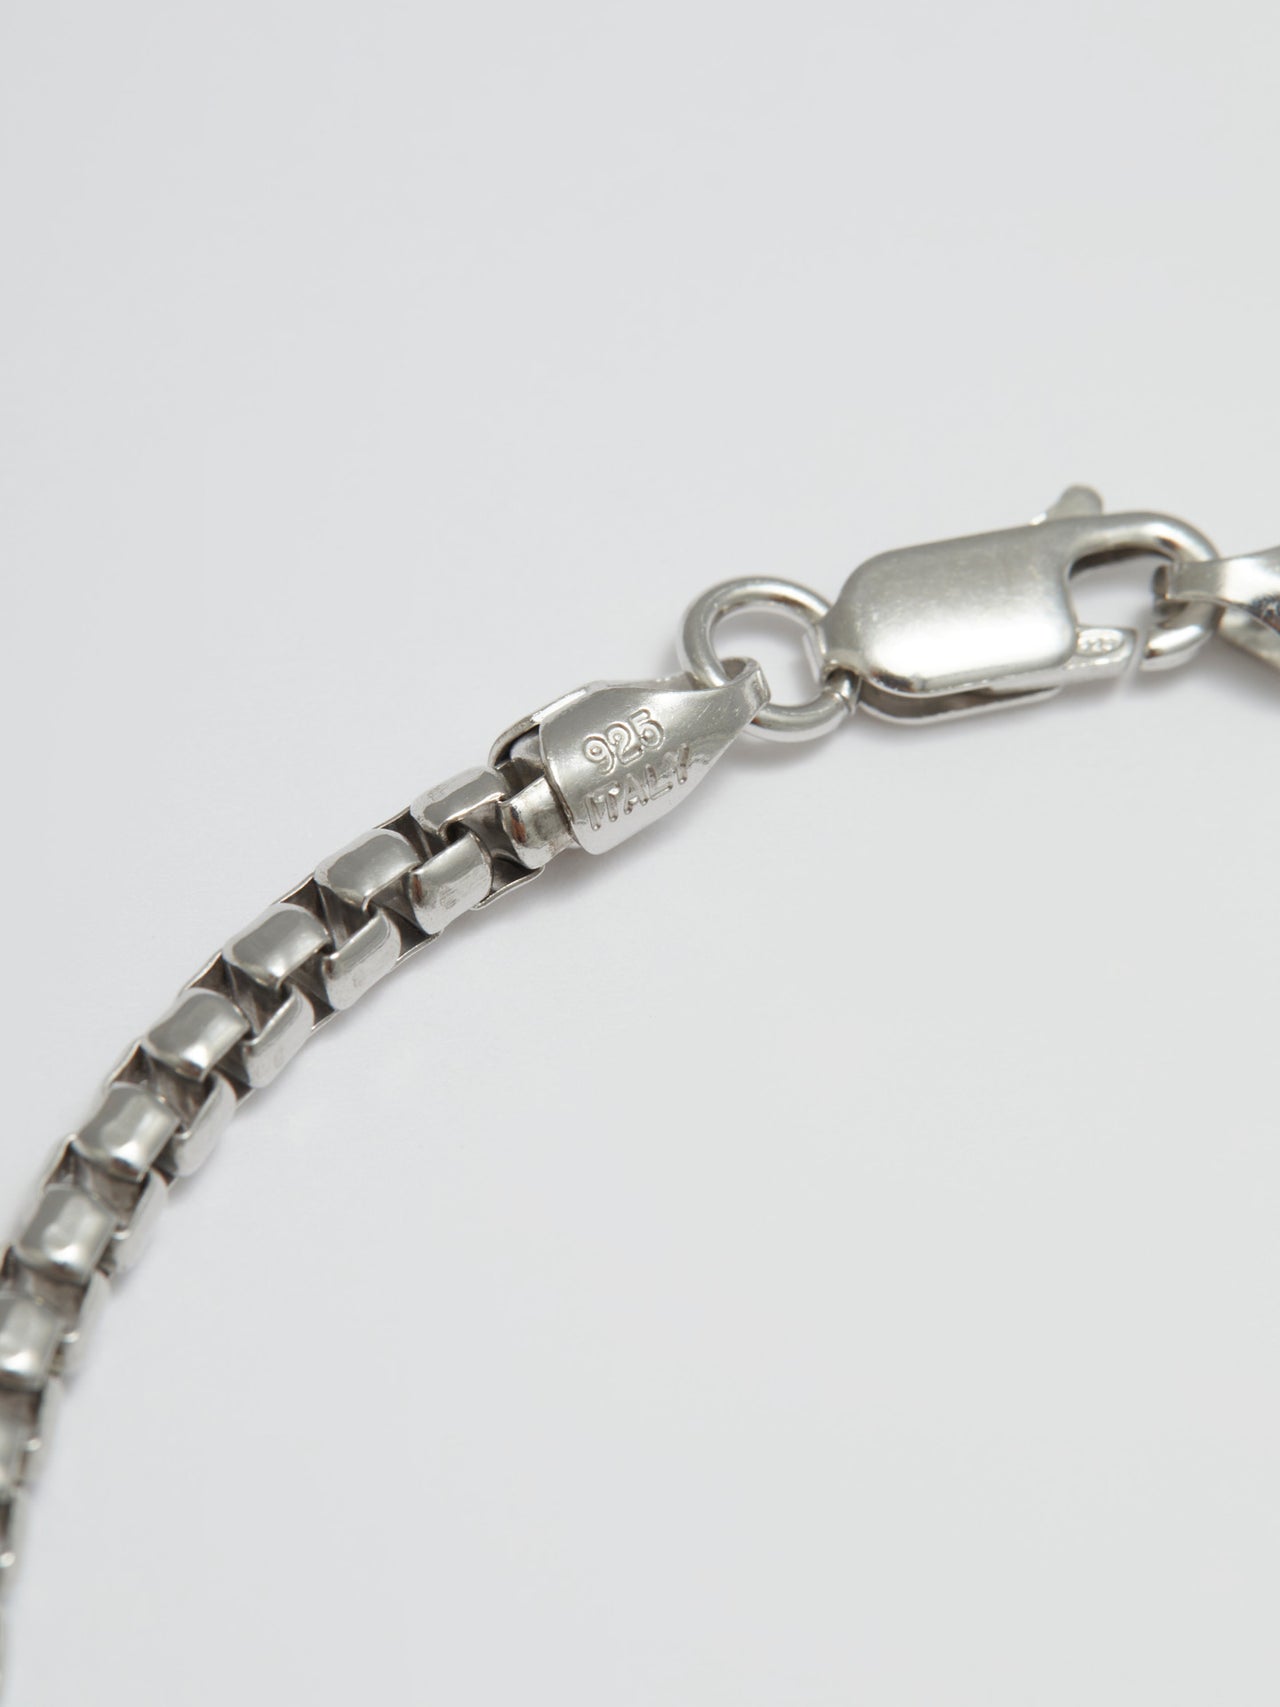 Close up of Gordita Necklace Clasp (Marked as 925 Made in Italy)